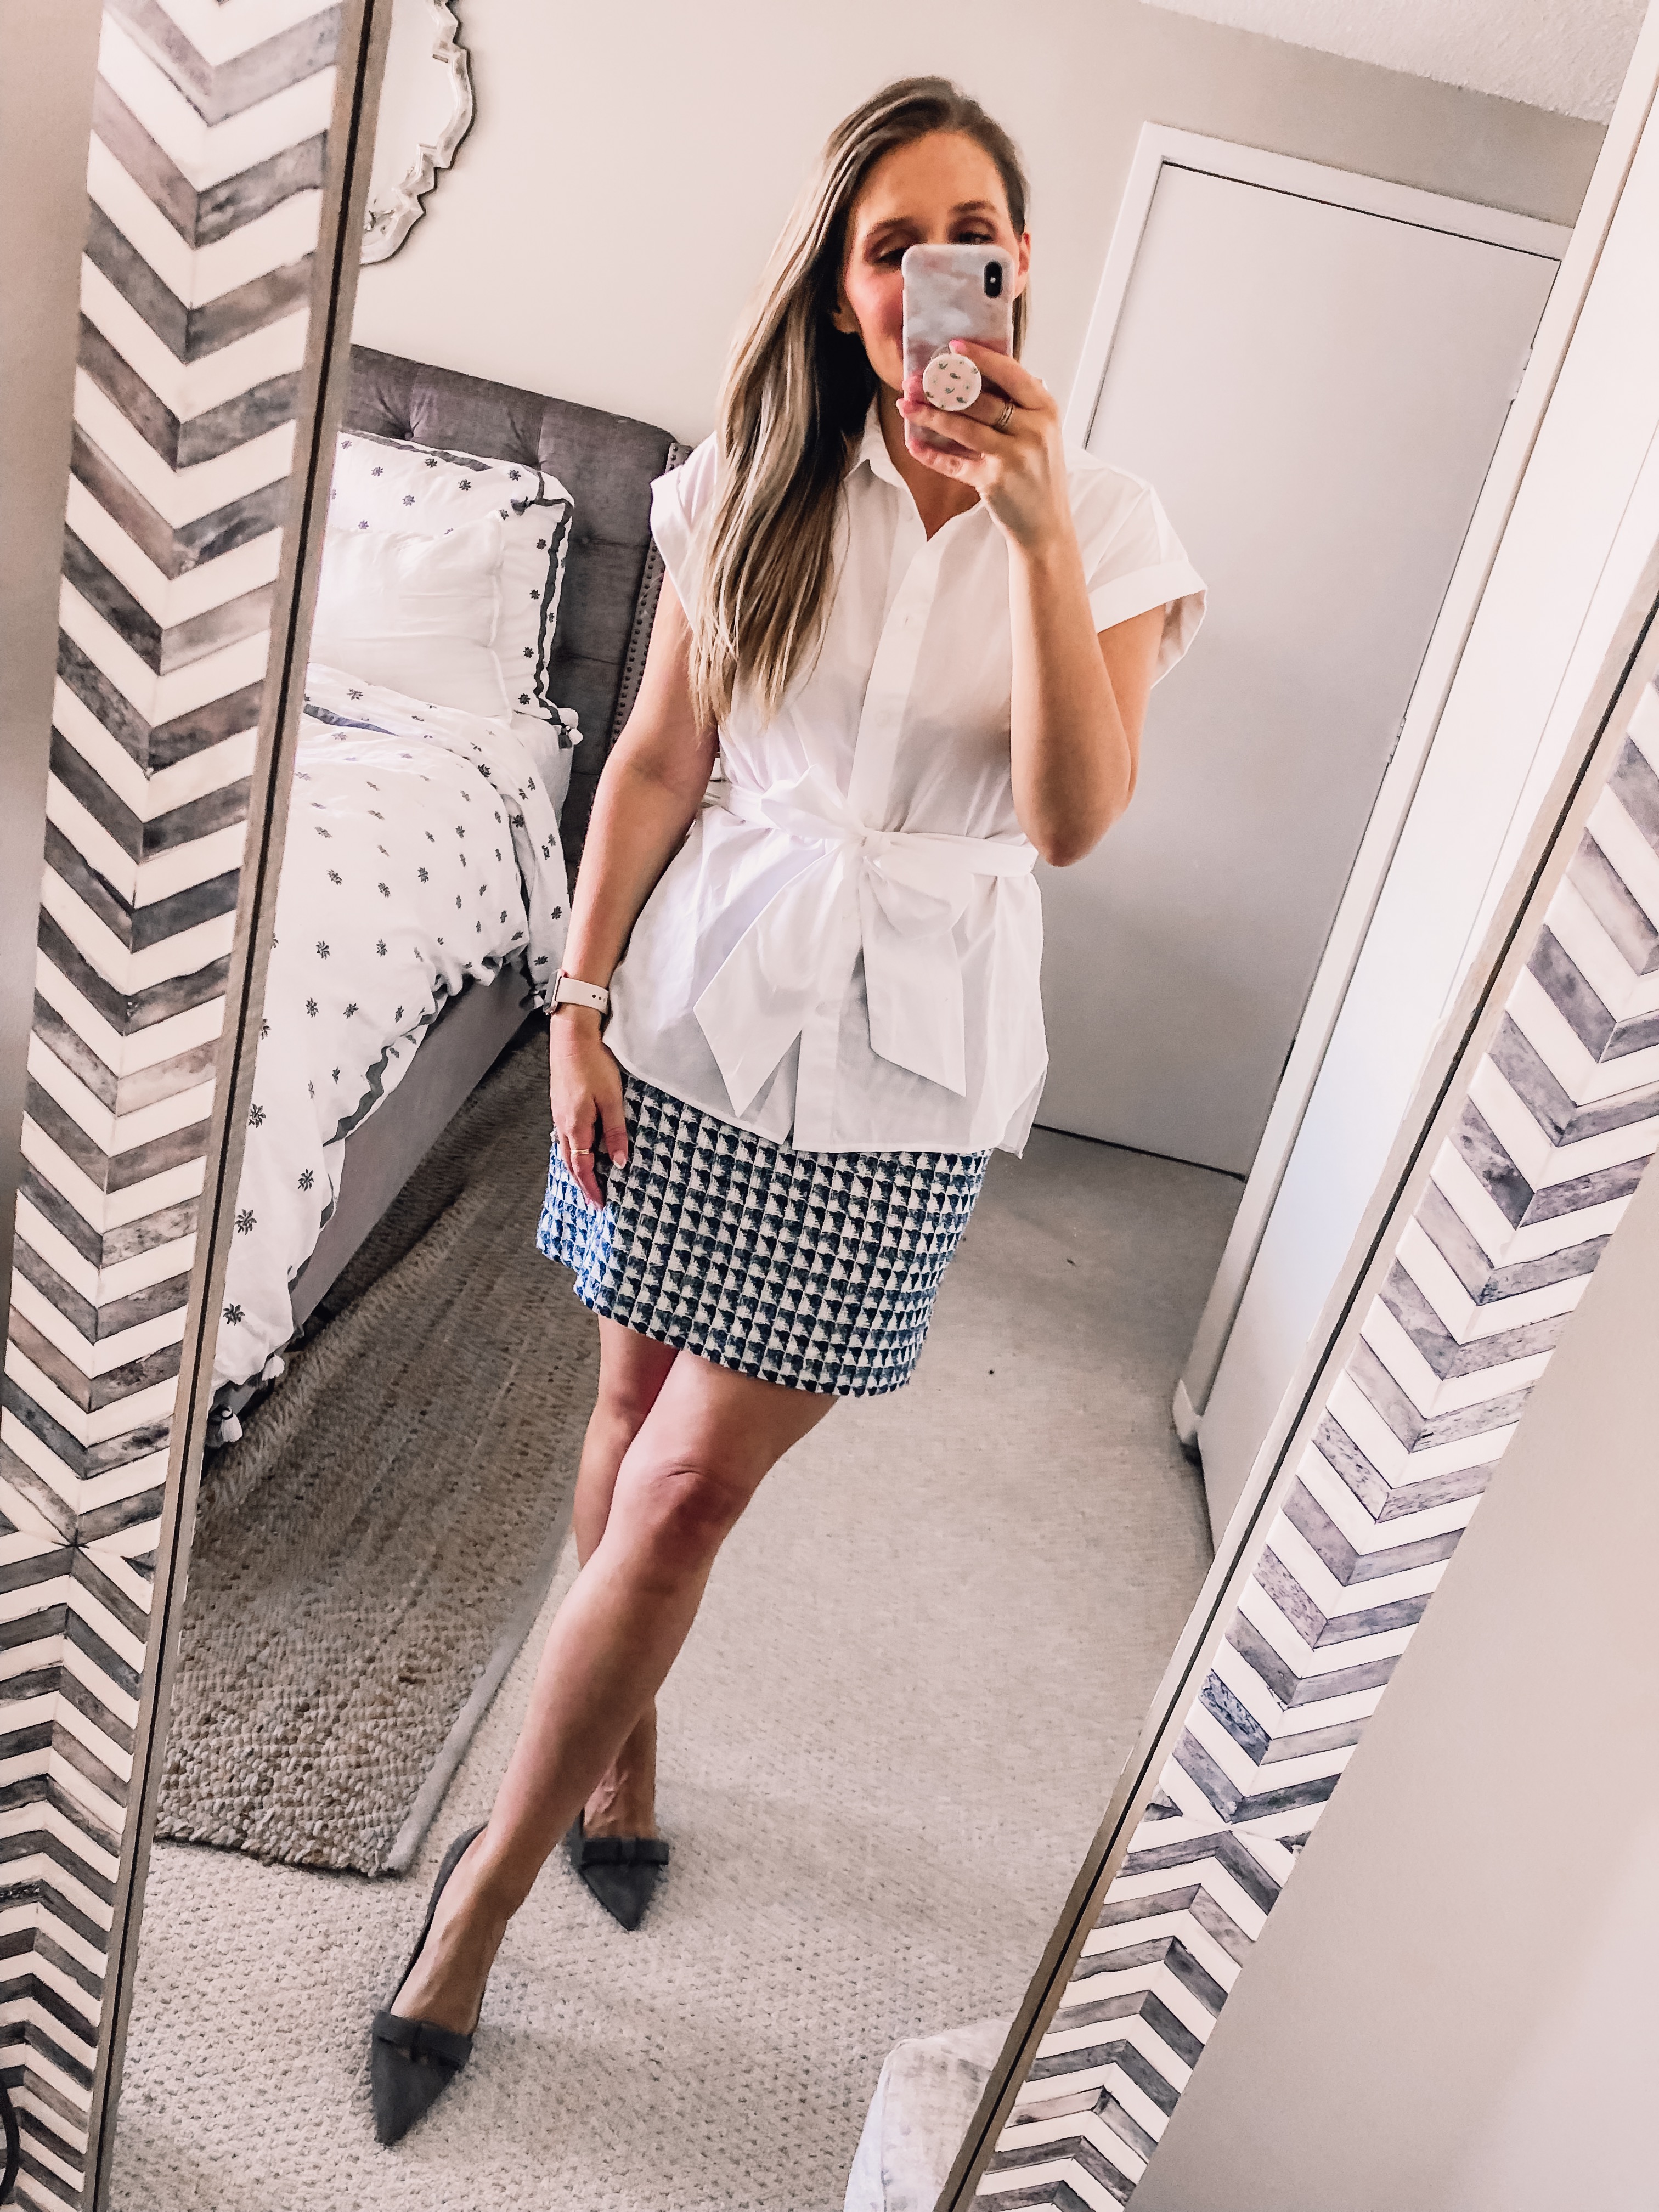 J.Crew Button Down and Geometric Skirt from LOFT for an office outfit